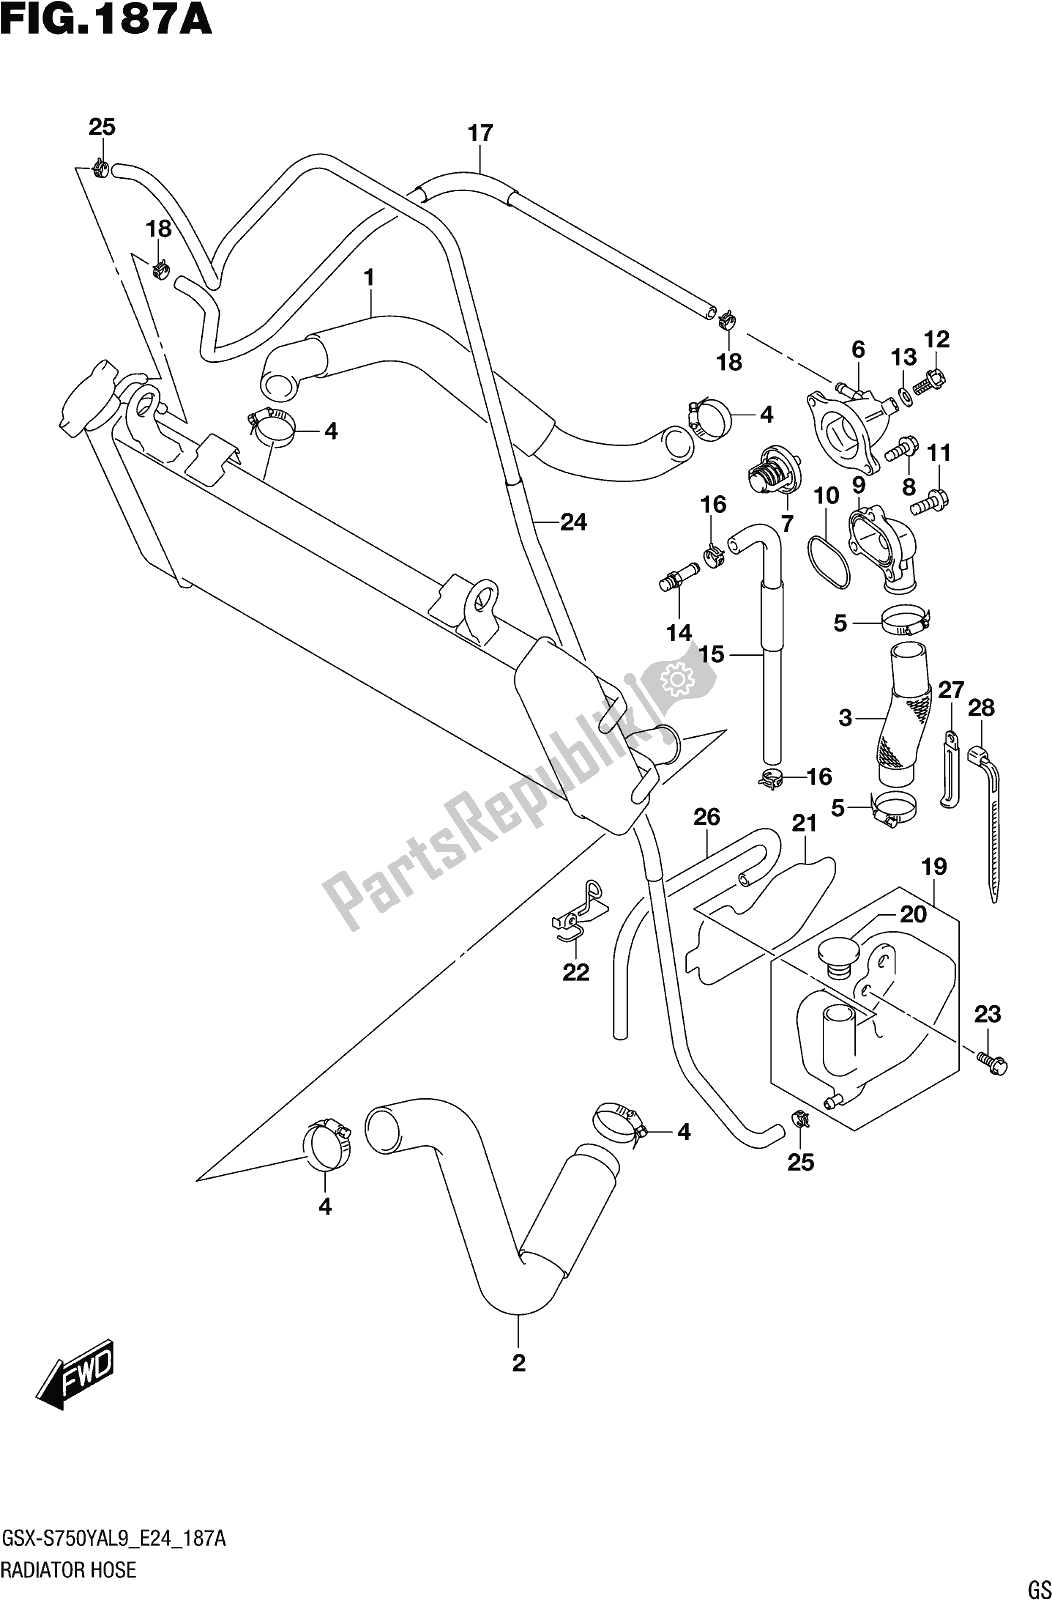 All parts for the Fig. 187a Radiator Hose of the Suzuki Gsx-s 750 ZA 2019